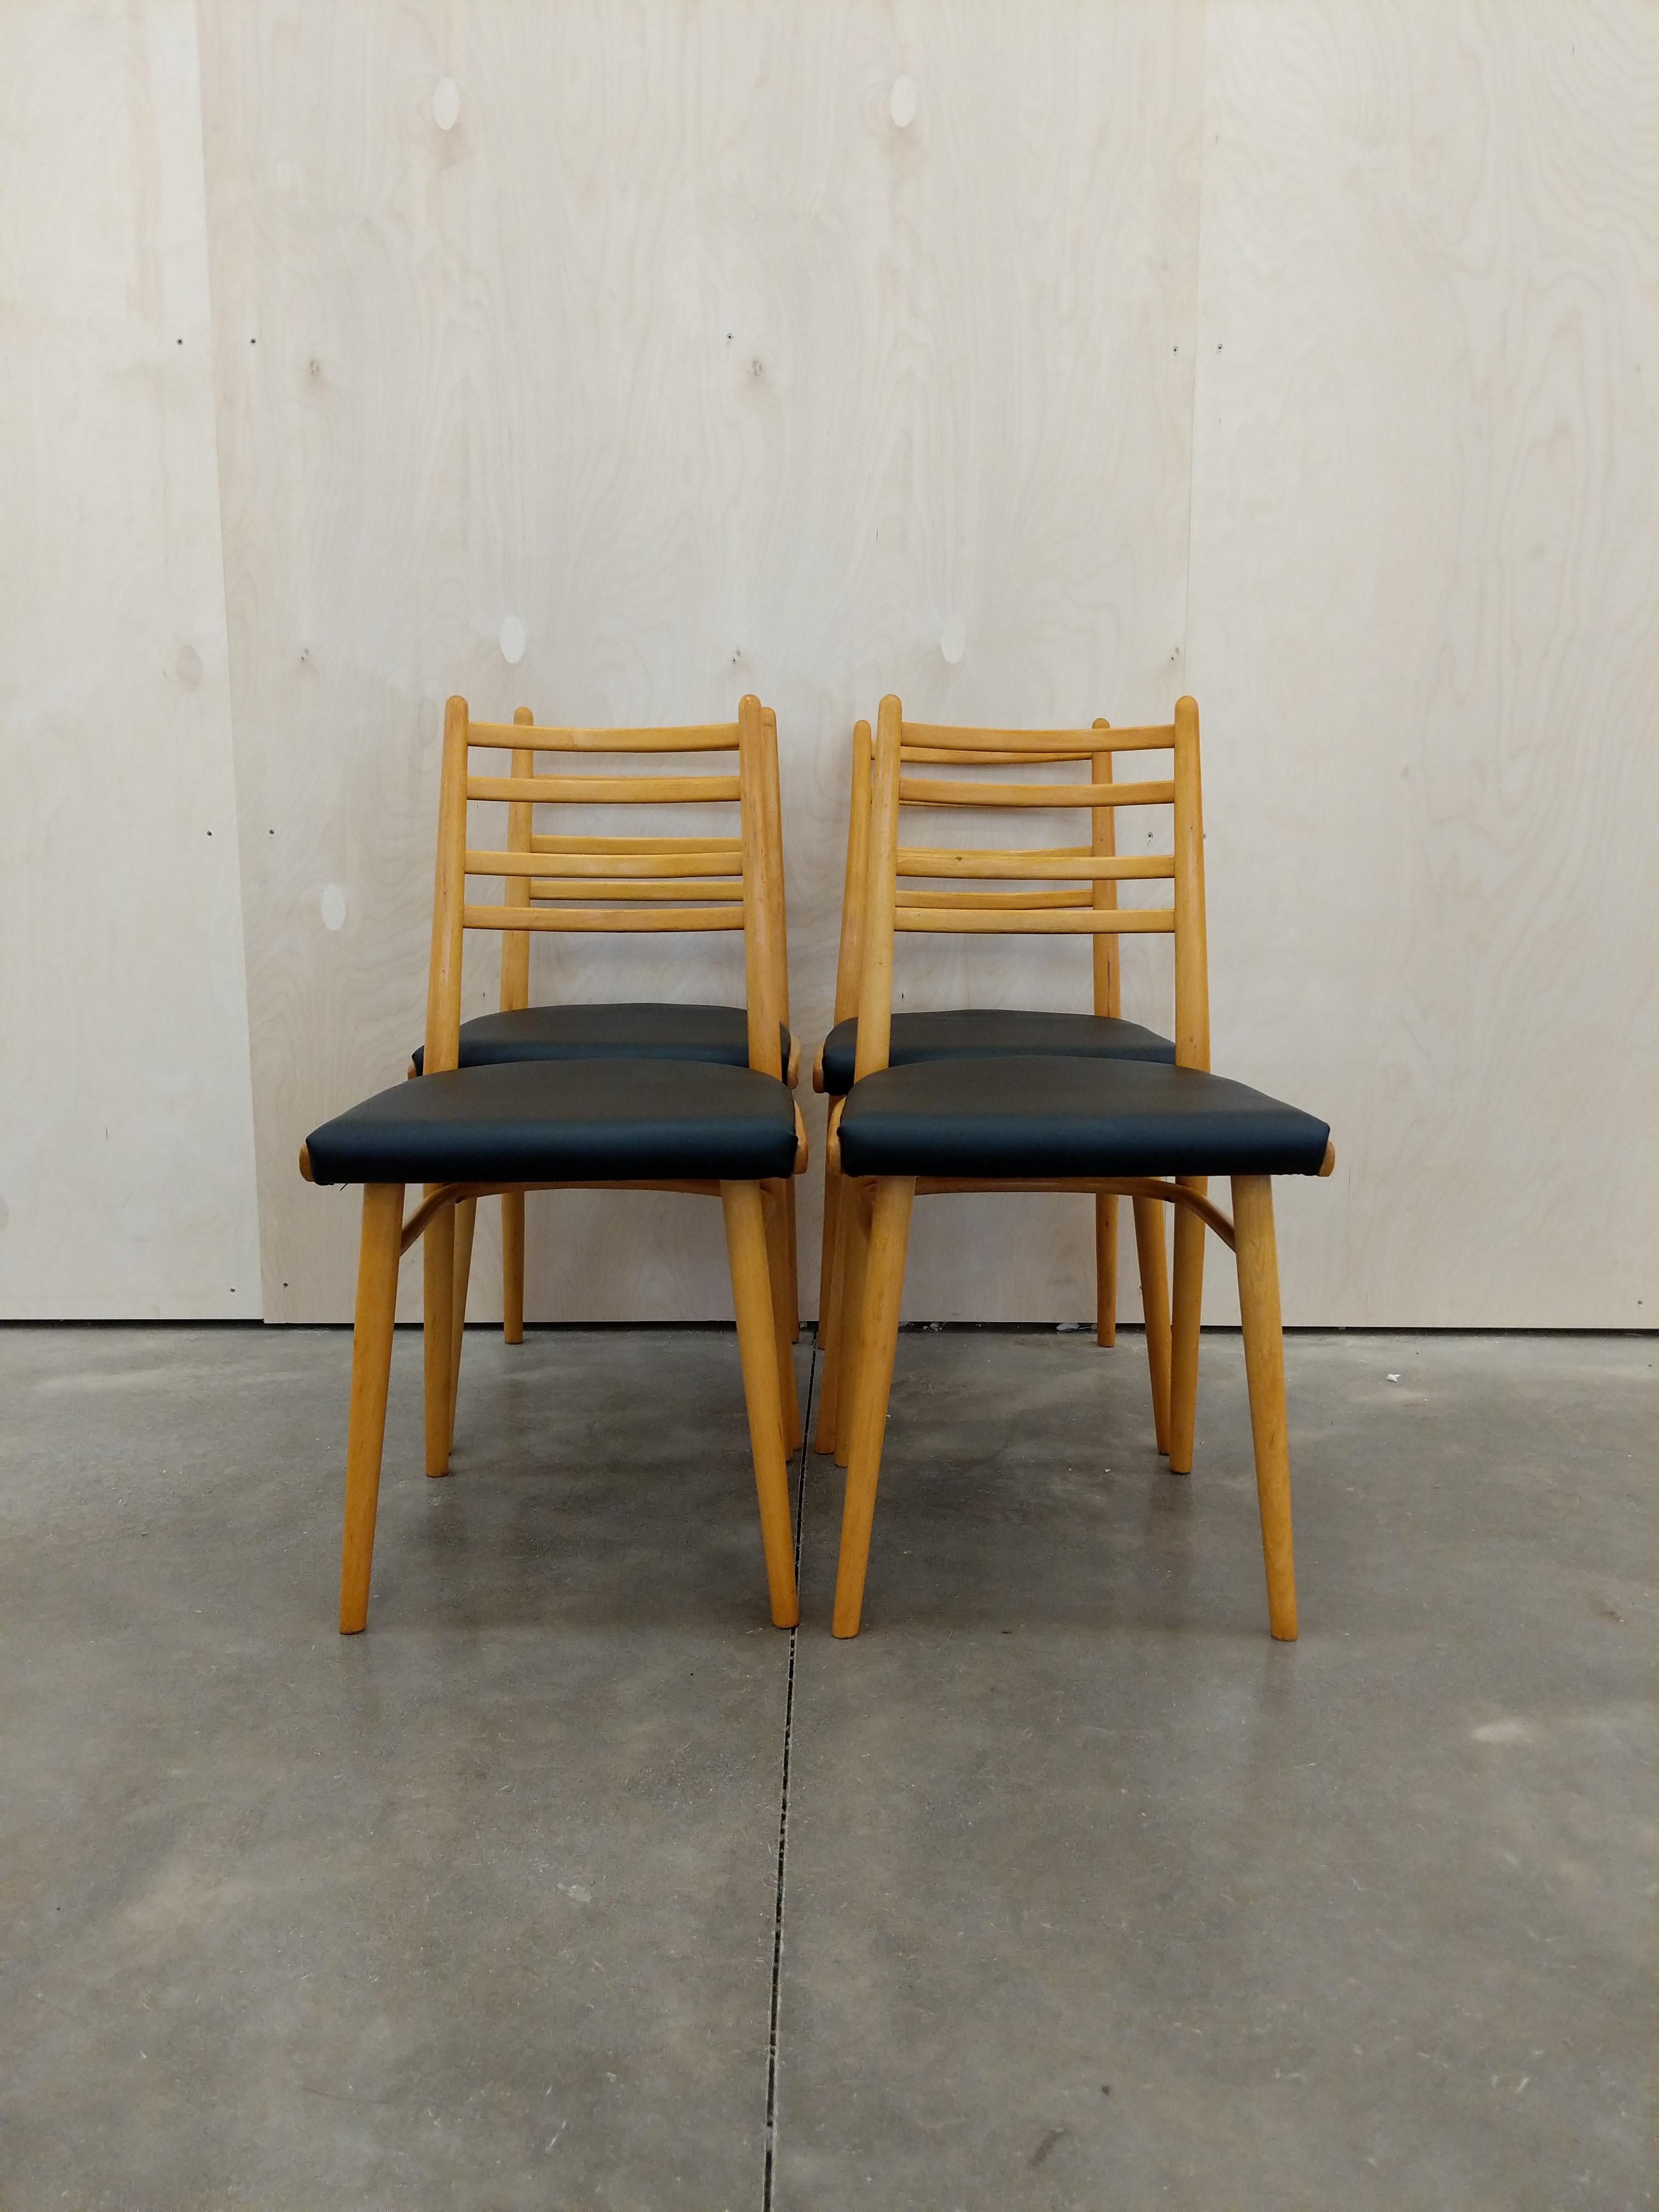 Set of 4 Vintage Czech Mid Century Modern Dining Chairs In Good Condition For Sale In Gardiner, NY